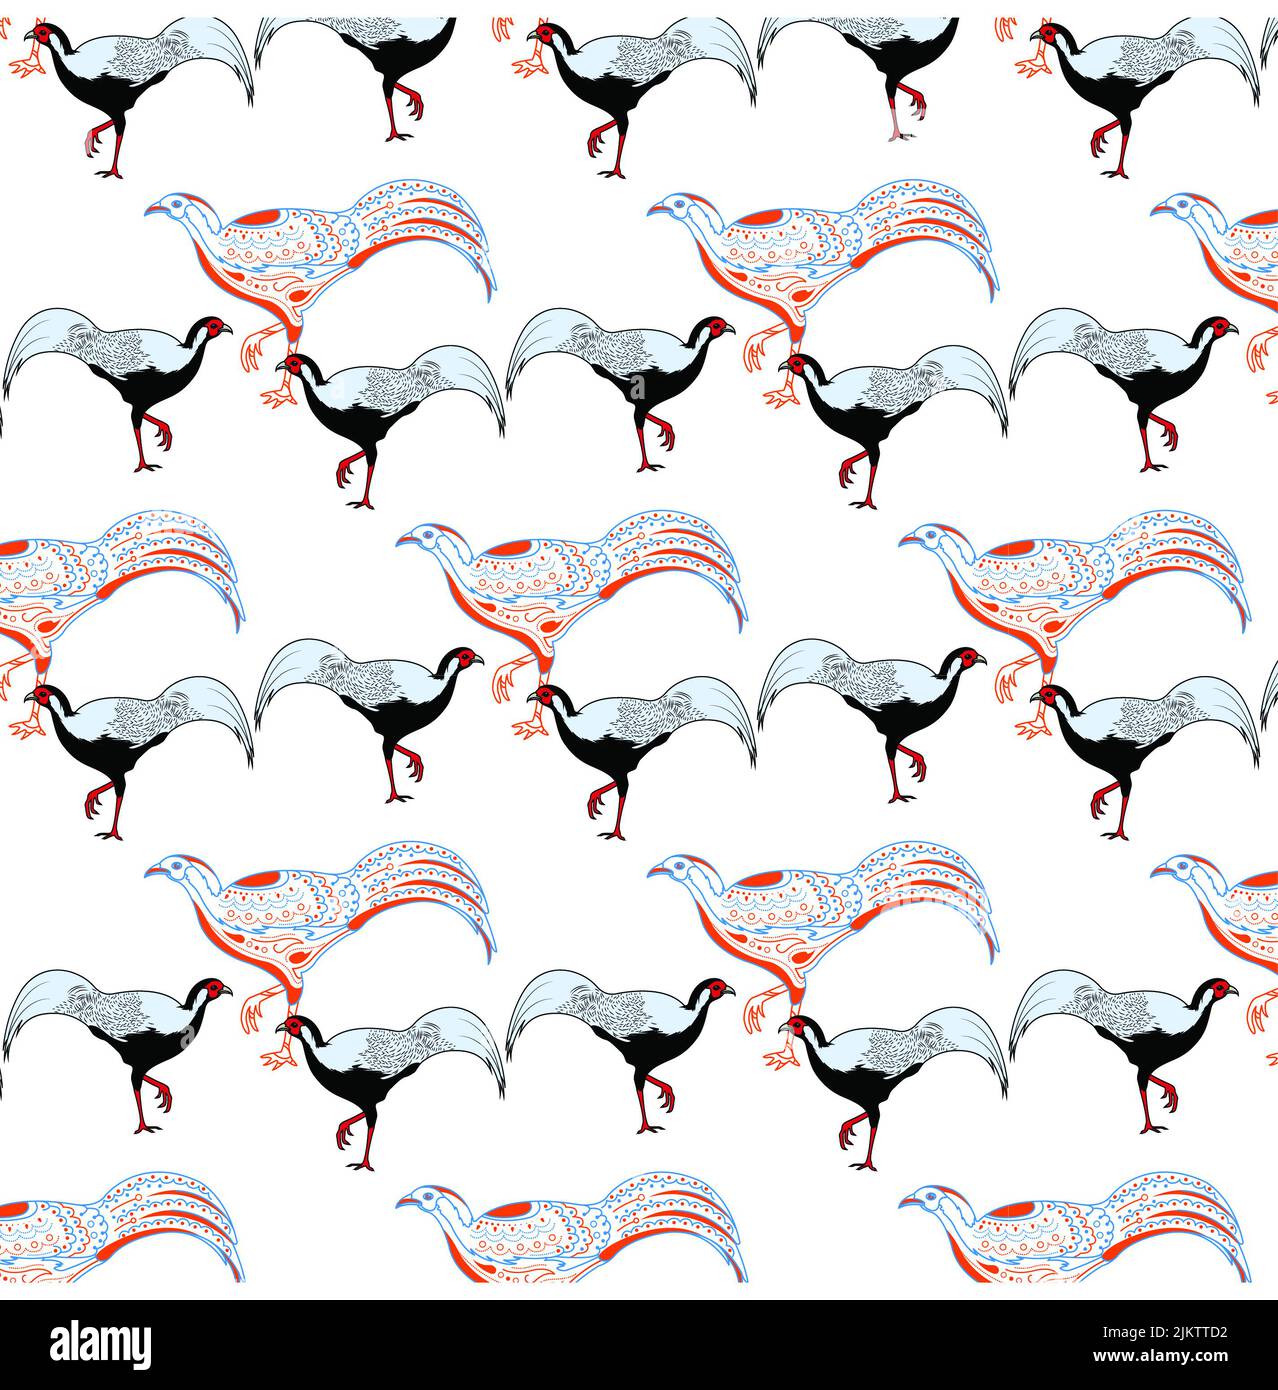 A seamless pattern with colorful pheasant birds on white background Stock Photo